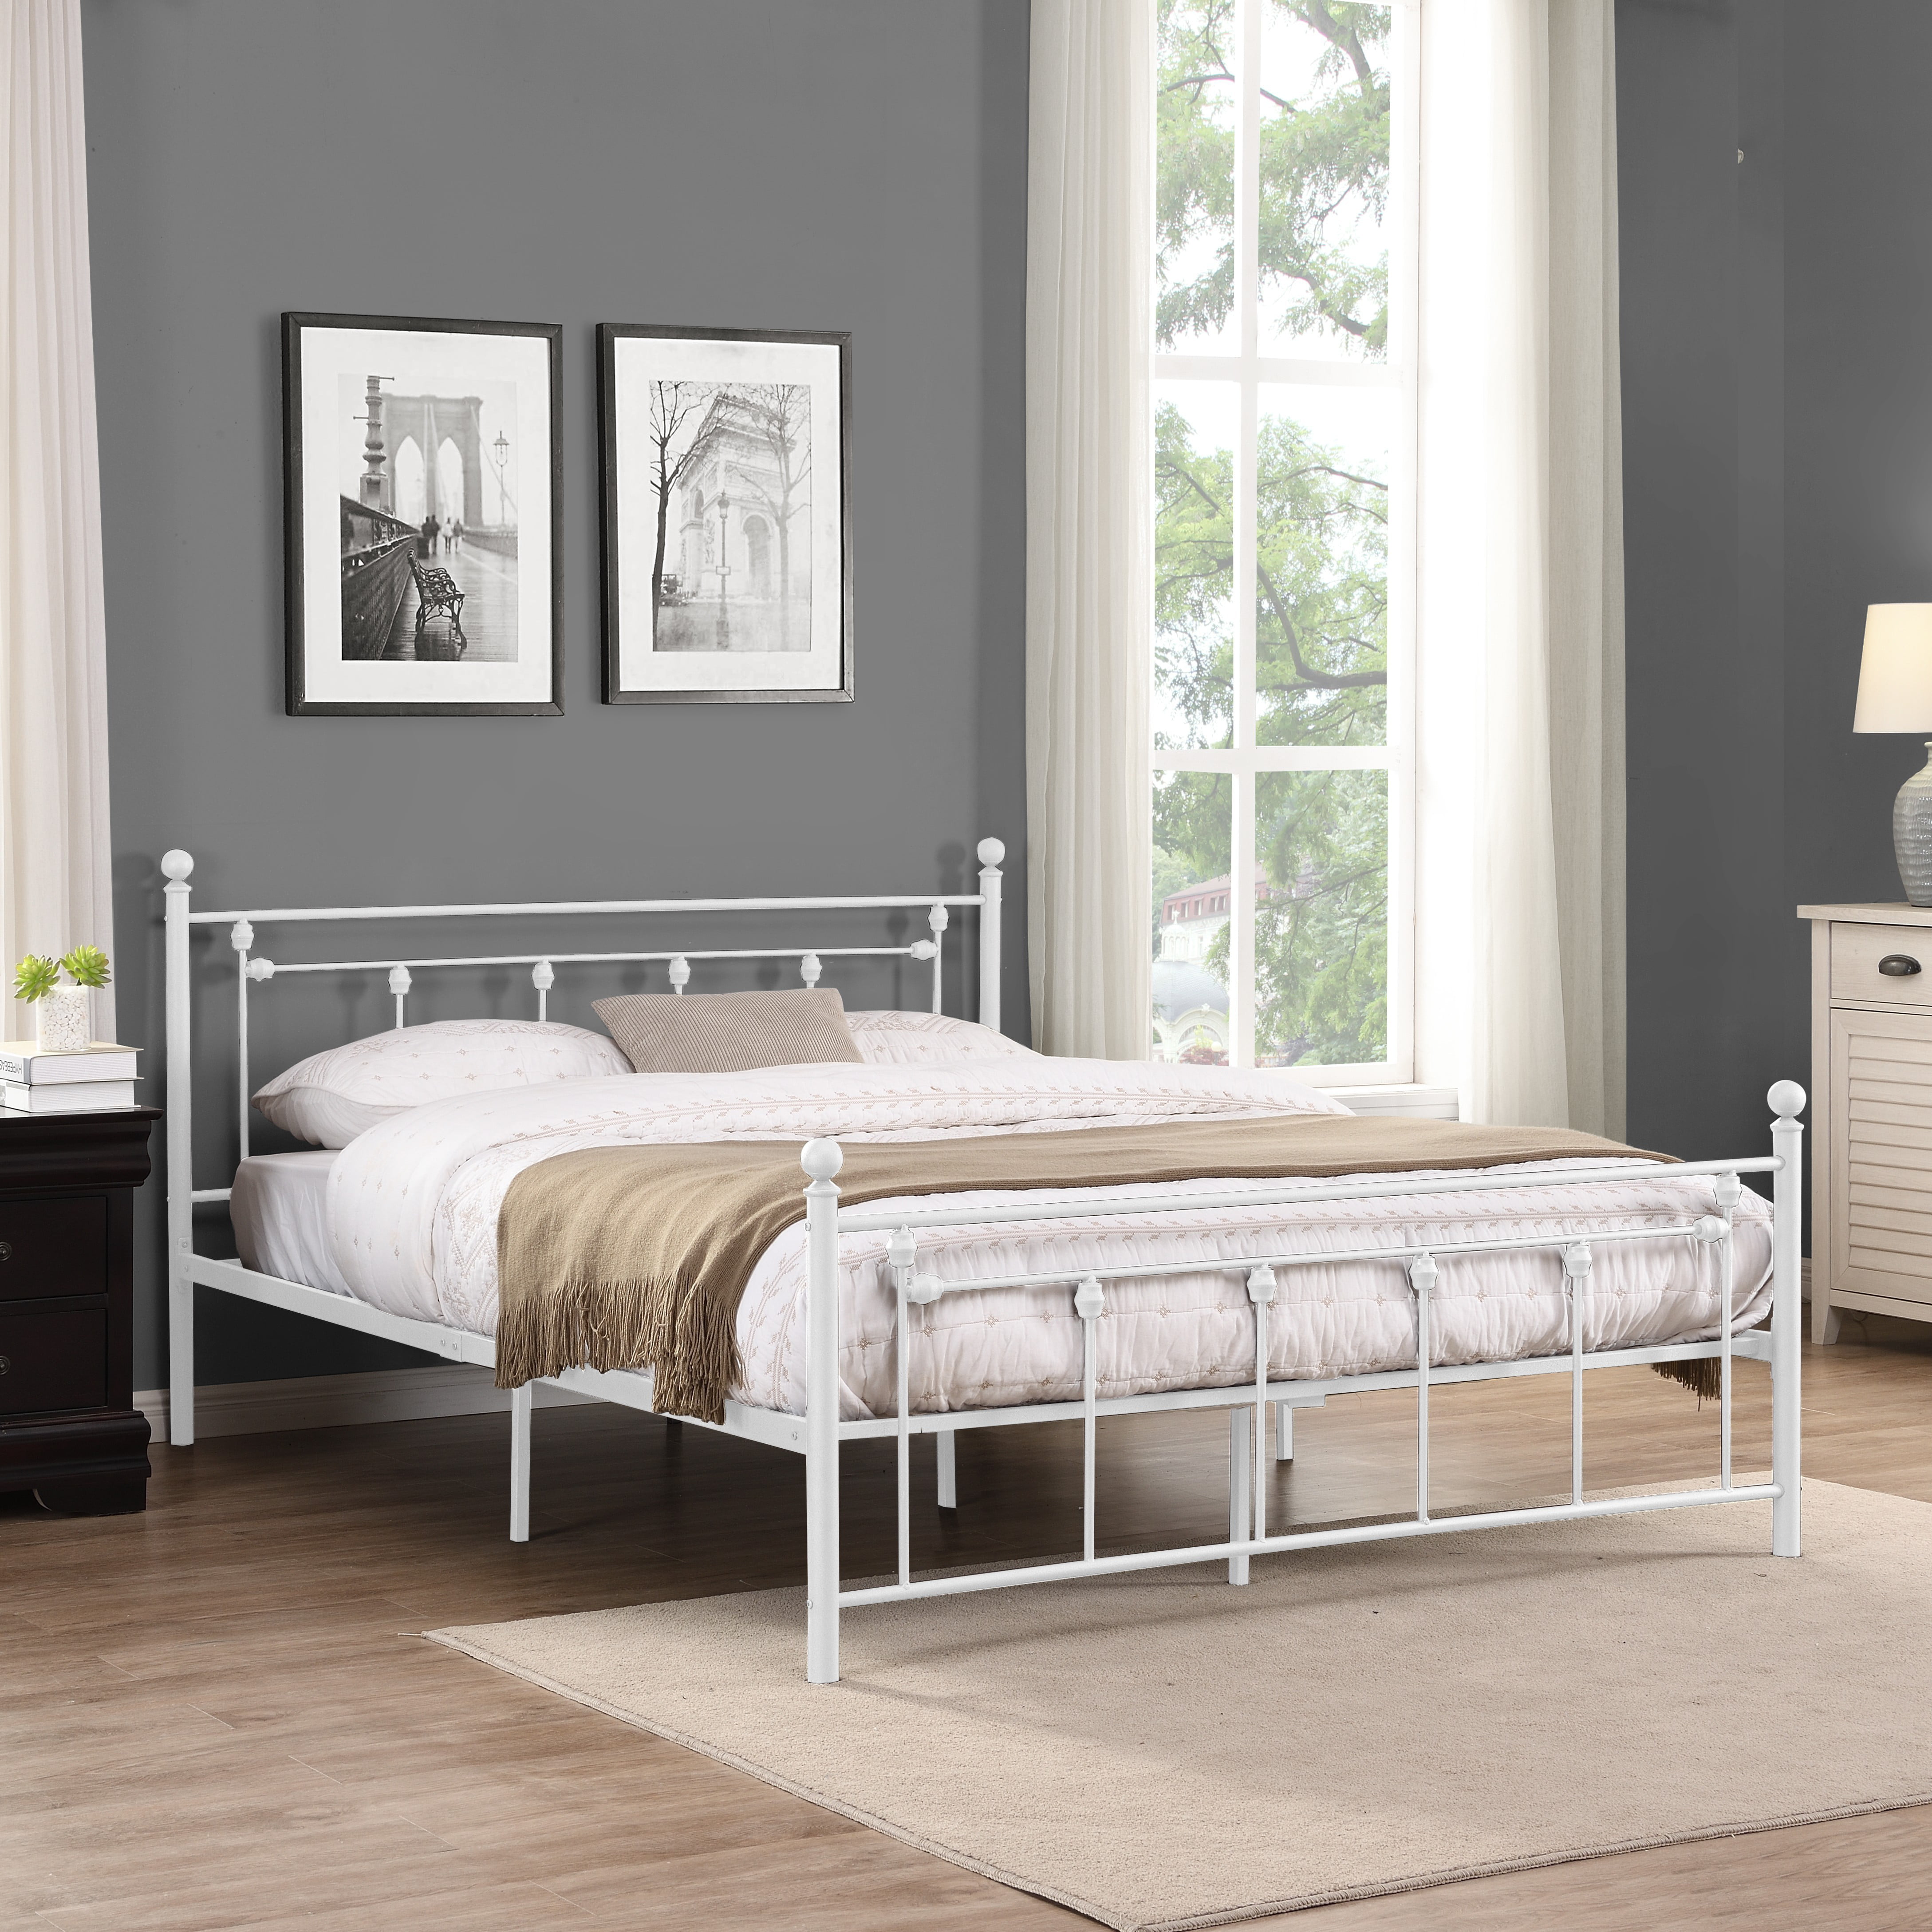 Metal Bed Frame Double Size Footboard Steel Slat Support Foundation Assemble easily 